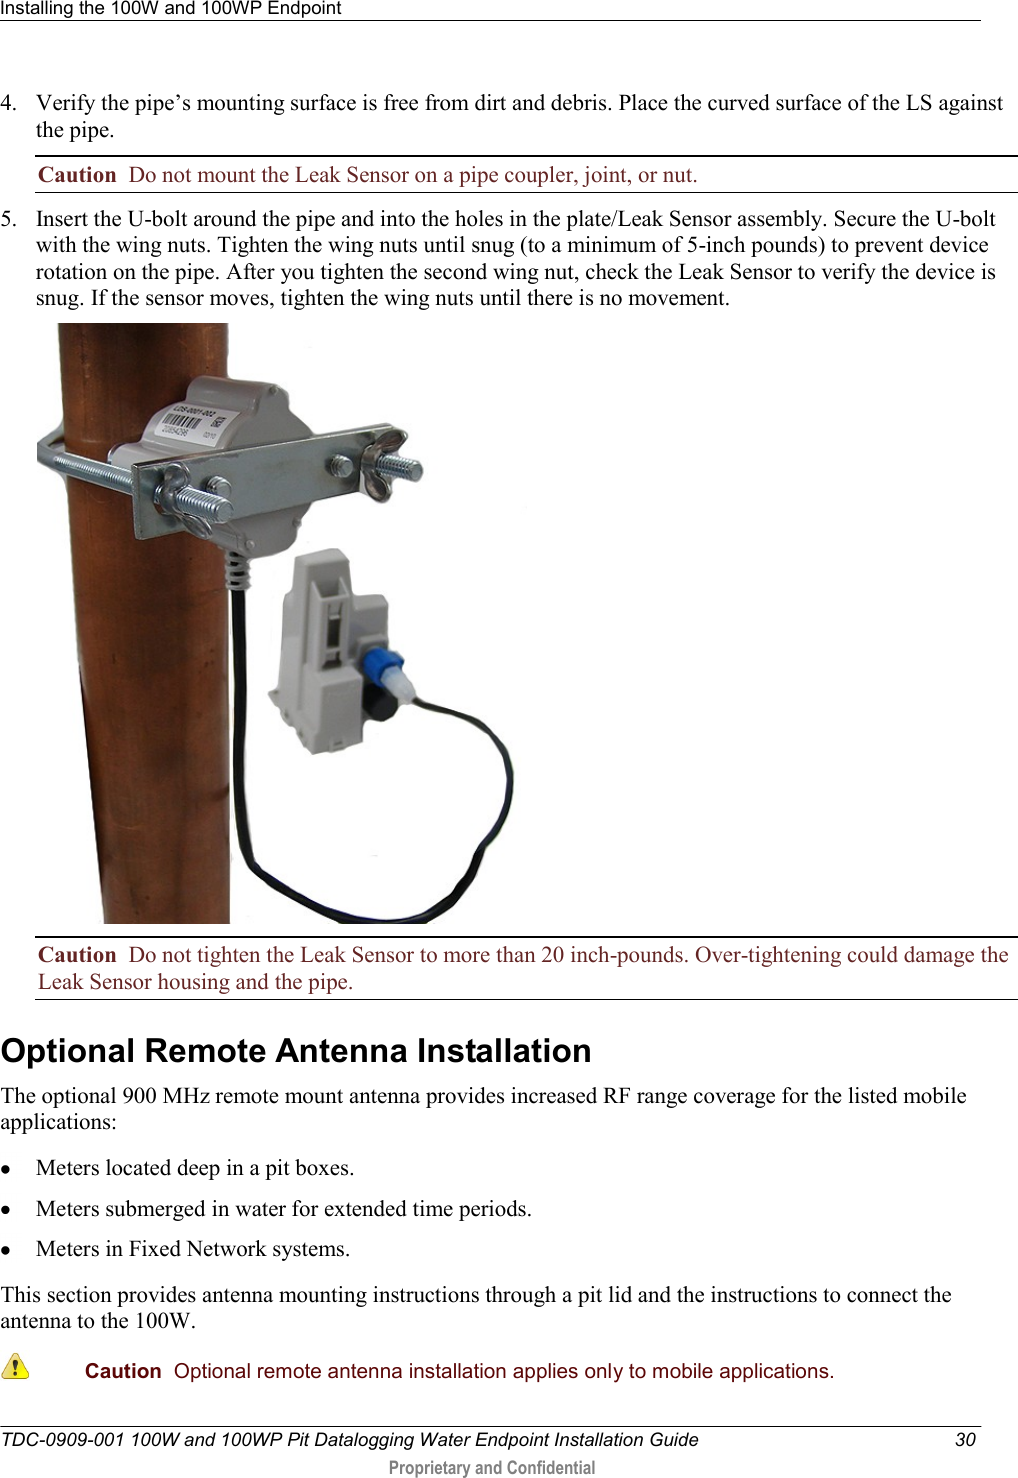 Installing the 100W and 100WP Endpoint   TDC-0909-001 100W and 100WP Pit Datalogging Water Endpoint Installation Guide  30  Proprietary and Confidential    4. Verify the pipe’s mounting surface is free from dirt and debris. Place the curved surface of the LS against the pipe.  Caution  Do not mount the Leak Sensor on a pipe coupler, joint, or nut. 5. Insert the U-bolt around the pipe and into the holes in the plate/Leak Sensor assembly. Secure the U-bolt with the wing nuts. Tighten the wing nuts until snug (to a minimum of 5-inch pounds) to prevent device rotation on the pipe. After you tighten the second wing nut, check the Leak Sensor to verify the device is snug. If the sensor moves, tighten the wing nuts until there is no movement.   Caution  Do not tighten the Leak Sensor to more than 20 inch-pounds. Over-tightening could damage the Leak Sensor housing and the pipe. Optional Remote Antenna Installation The optional 900 MHz remote mount antenna provides increased RF range coverage for the listed mobile applications:  Meters located deep in a pit boxes.  Meters submerged in water for extended time periods.   Meters in Fixed Network systems. This section provides antenna mounting instructions through a pit lid and the instructions to connect the antenna to the 100W.  Caution  Optional remote antenna installation applies only to mobile applications. 